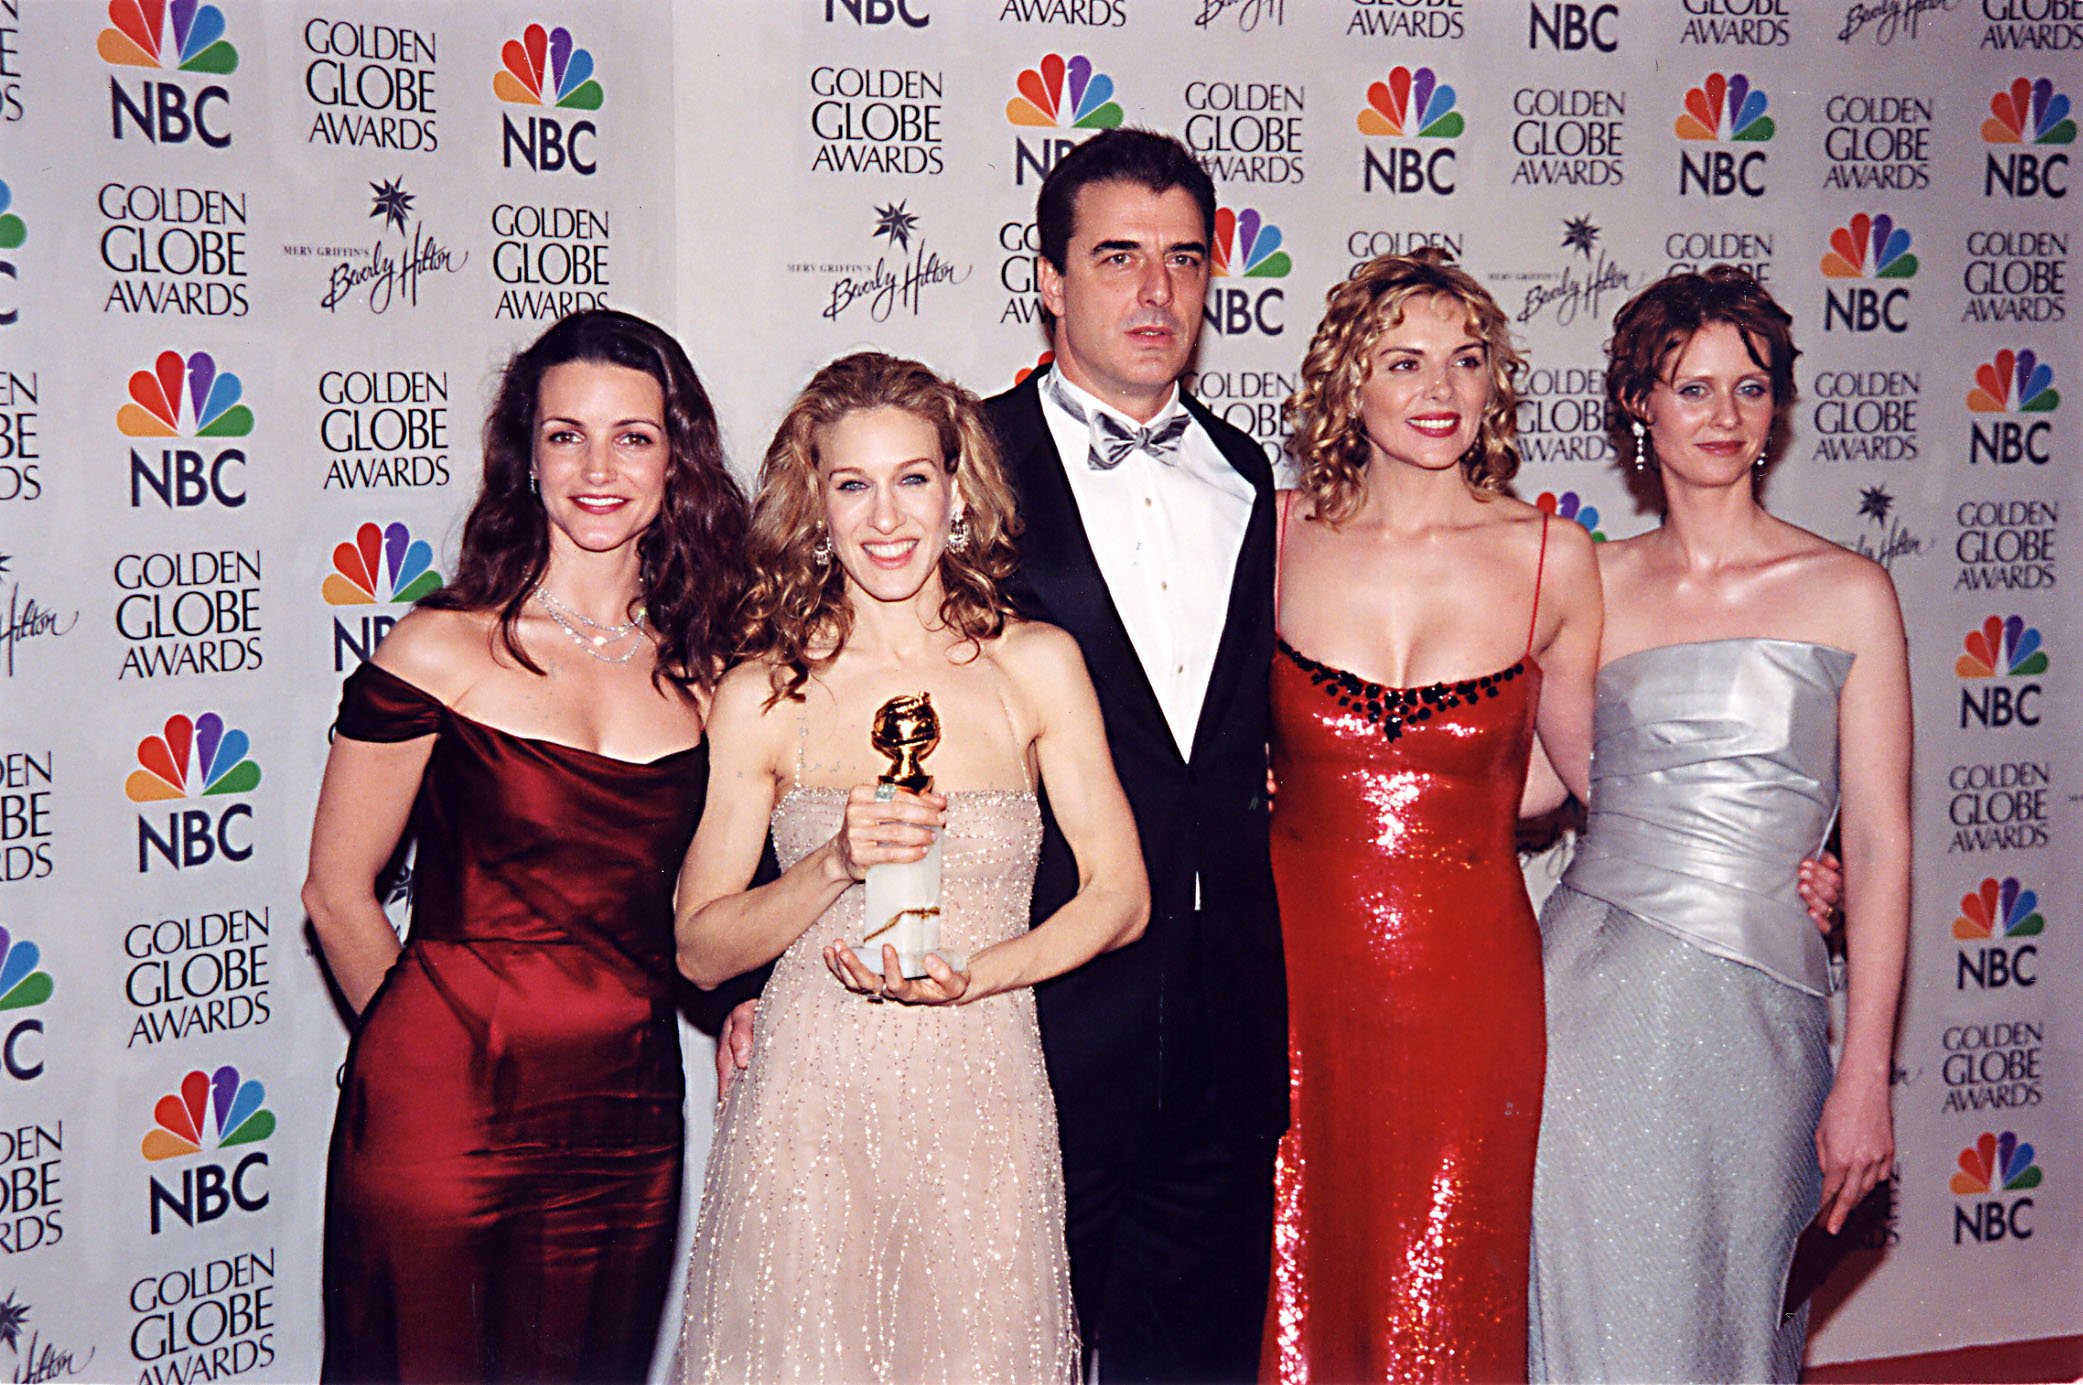 Kristin Davis, Sarah Jessica Parker, Chris Noth, Kim Cattrall and Cynthia Nixon appear at the Golden Globes in 2000